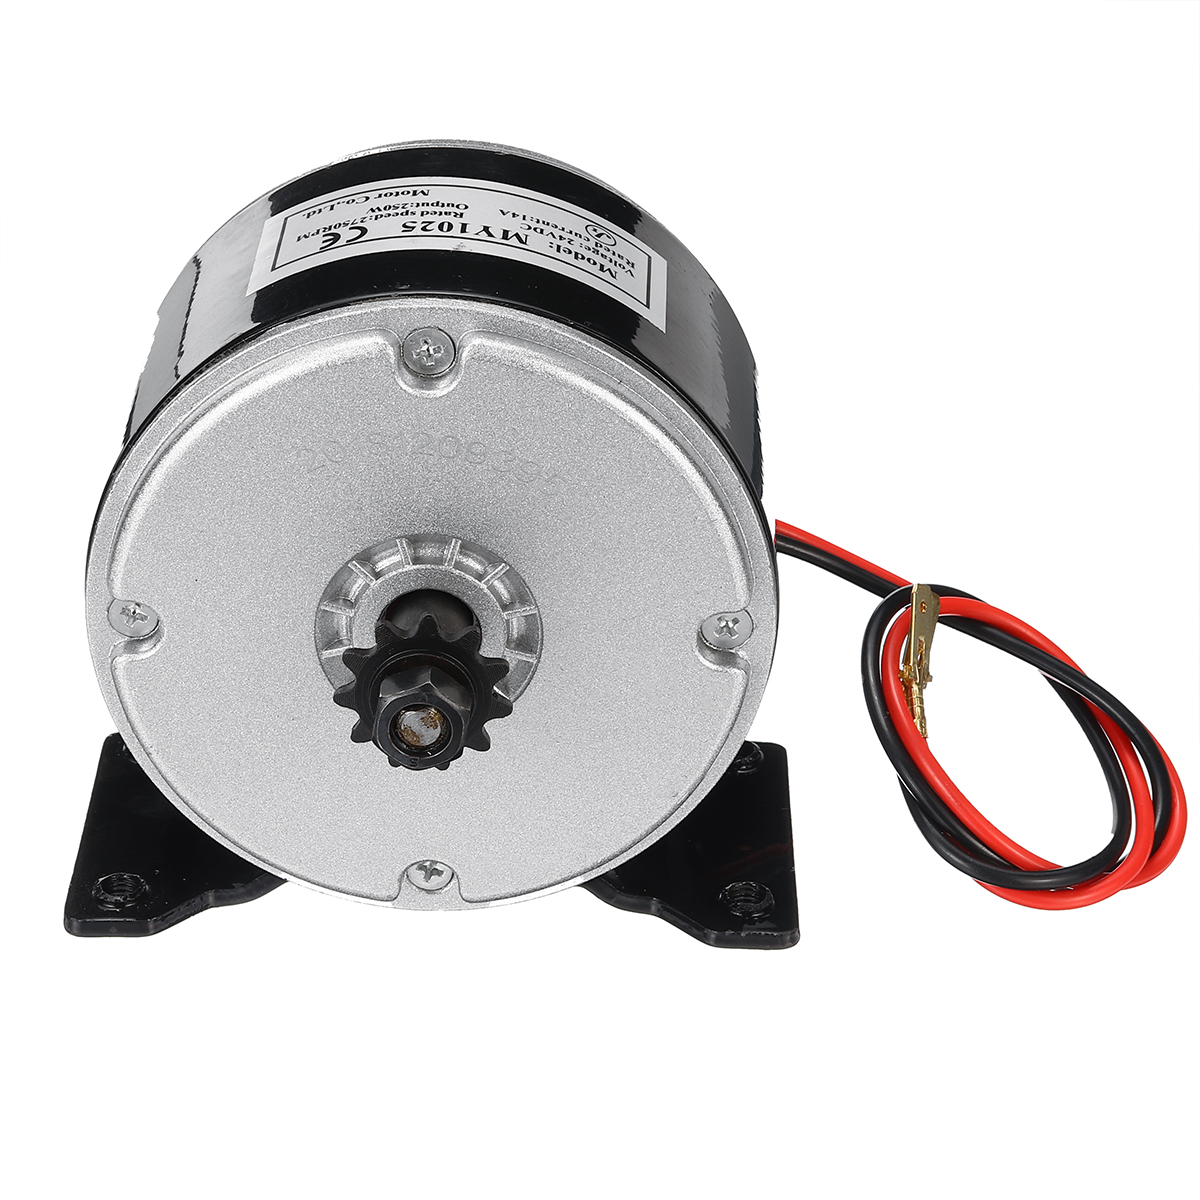 24V 250W Brushed Motor with Controller for 25H Chain Electric Bicycle Scooter E-Bike - Auto GoShop